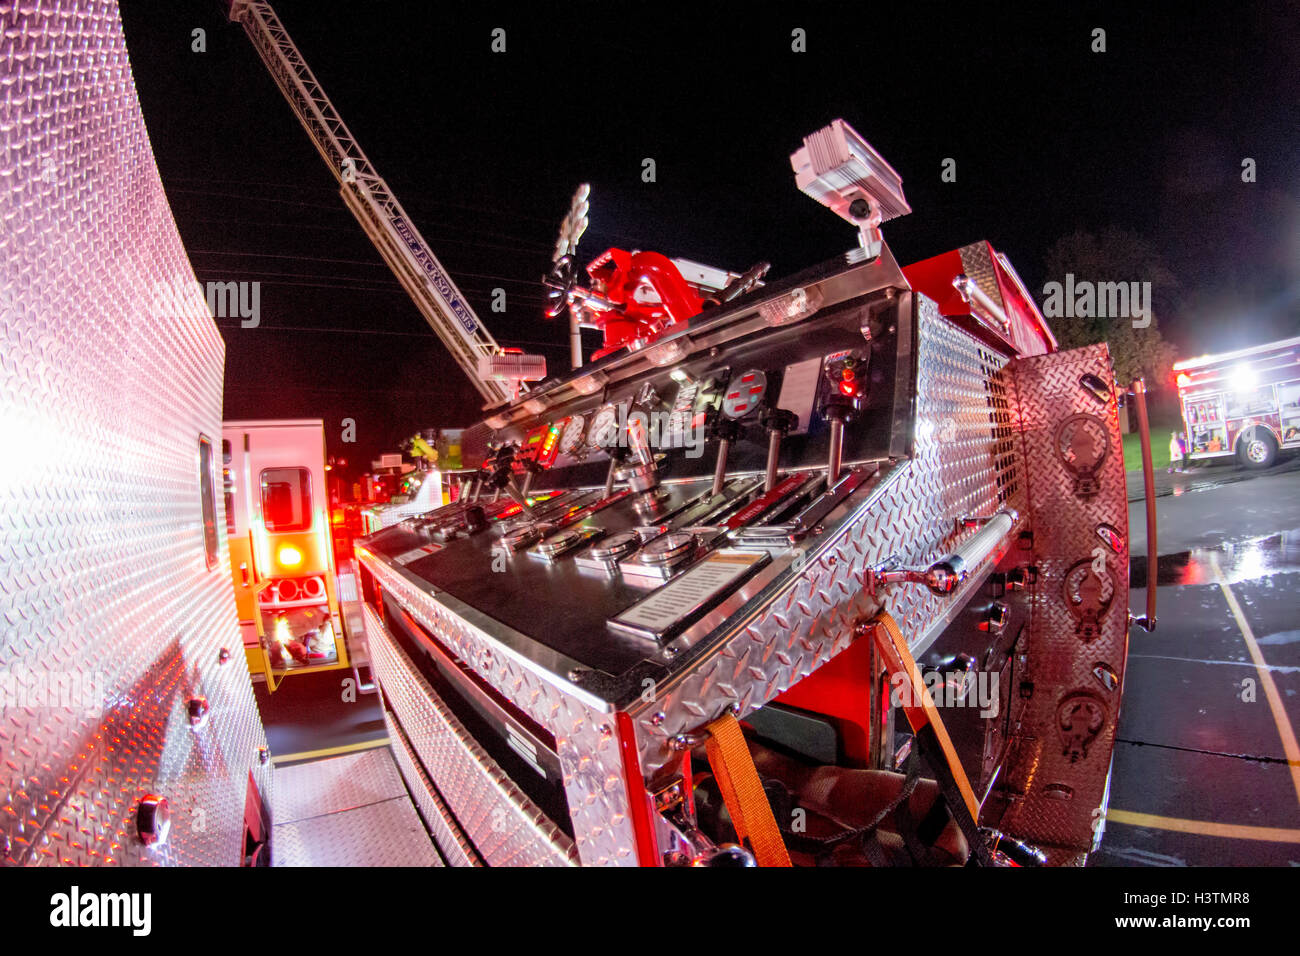 Fire engine controls at night Stock Photo